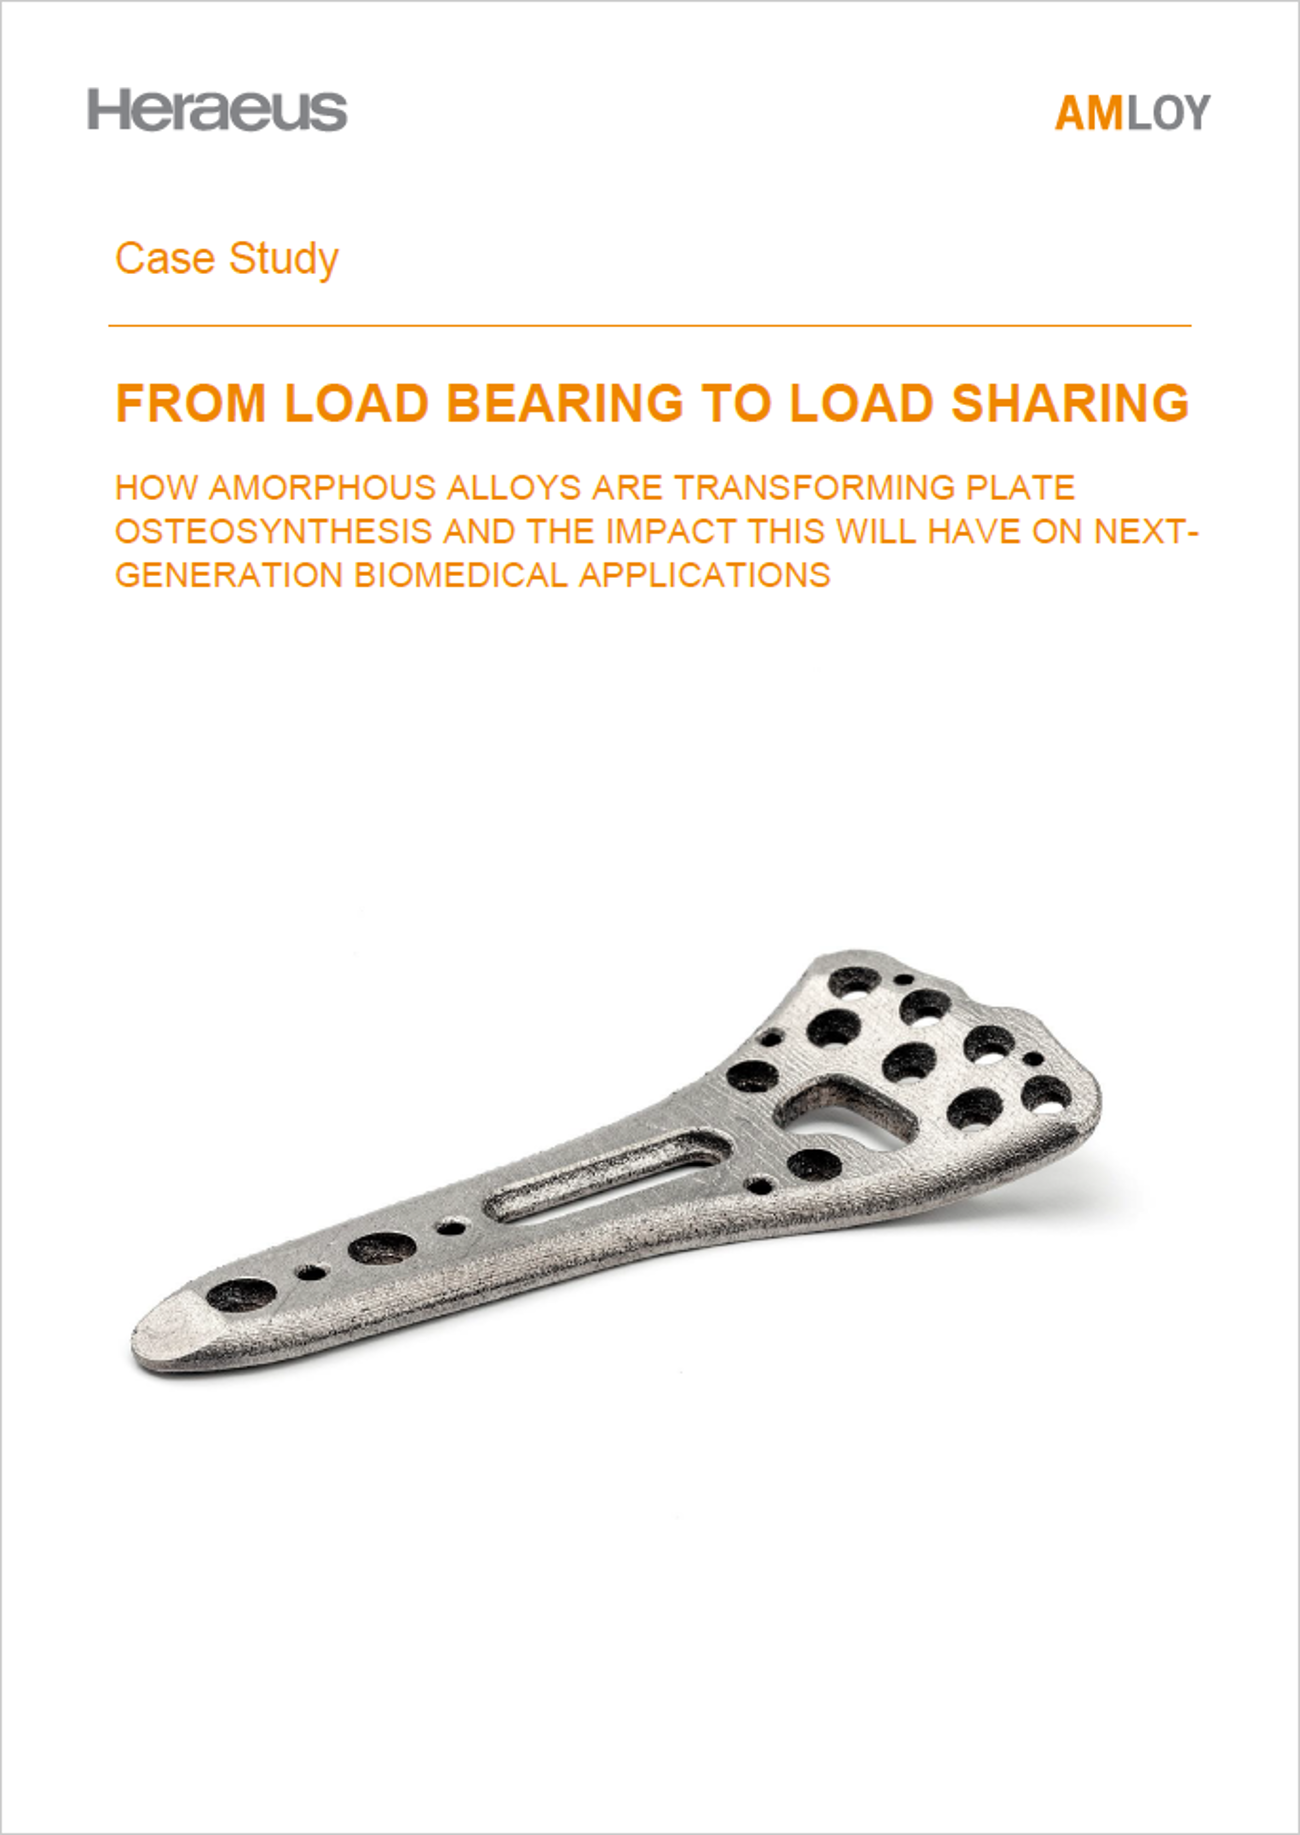 Case Study - From Load Bearing to Load Sharing